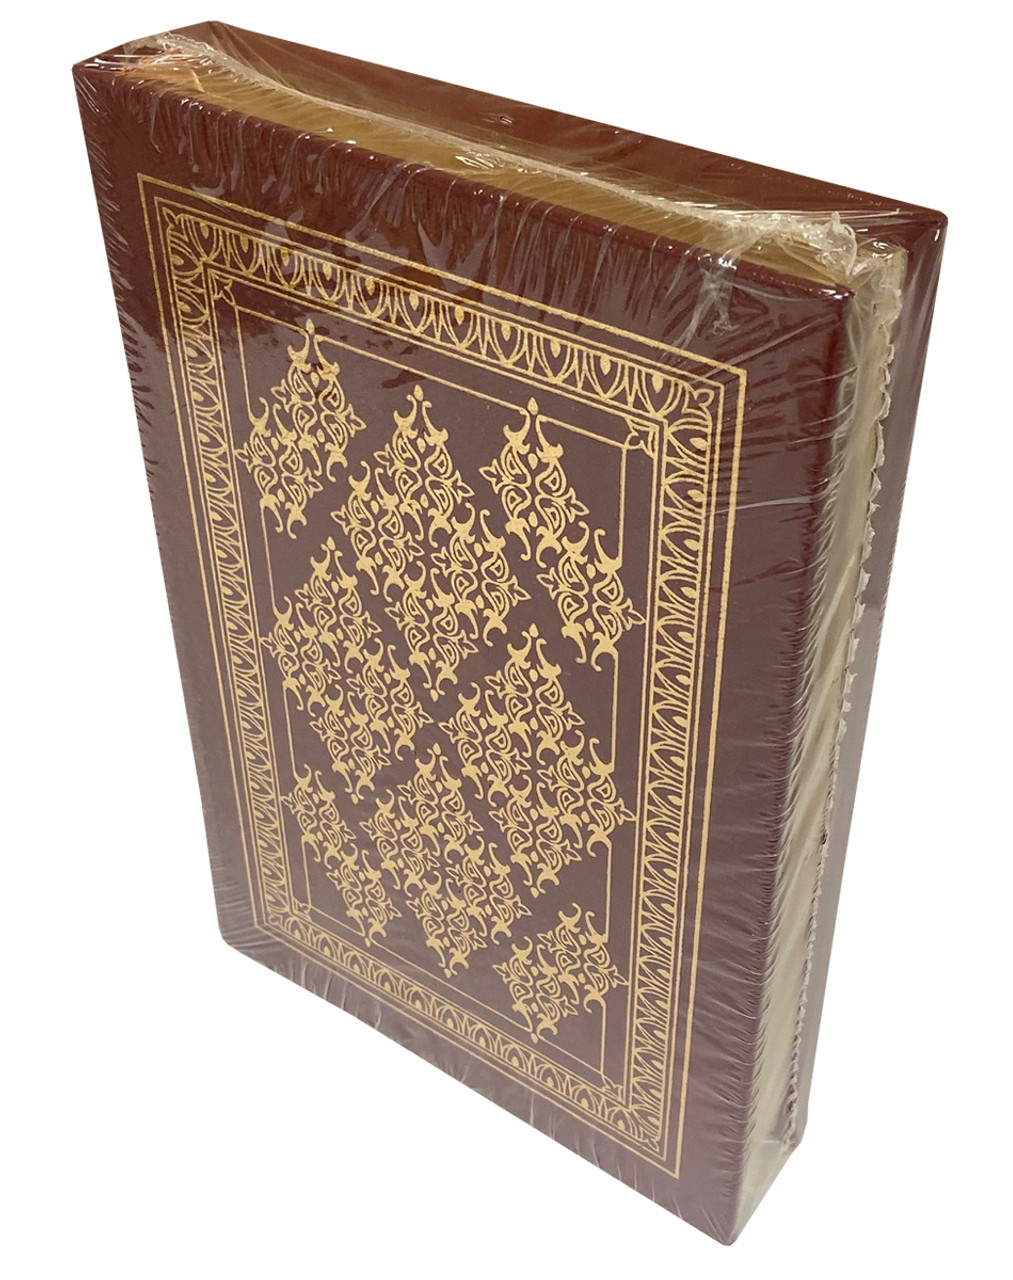 A.S. Byatt "Possession" Signed Limited Edition, Leather Bound Collector's Edition w/COA [Sealed]